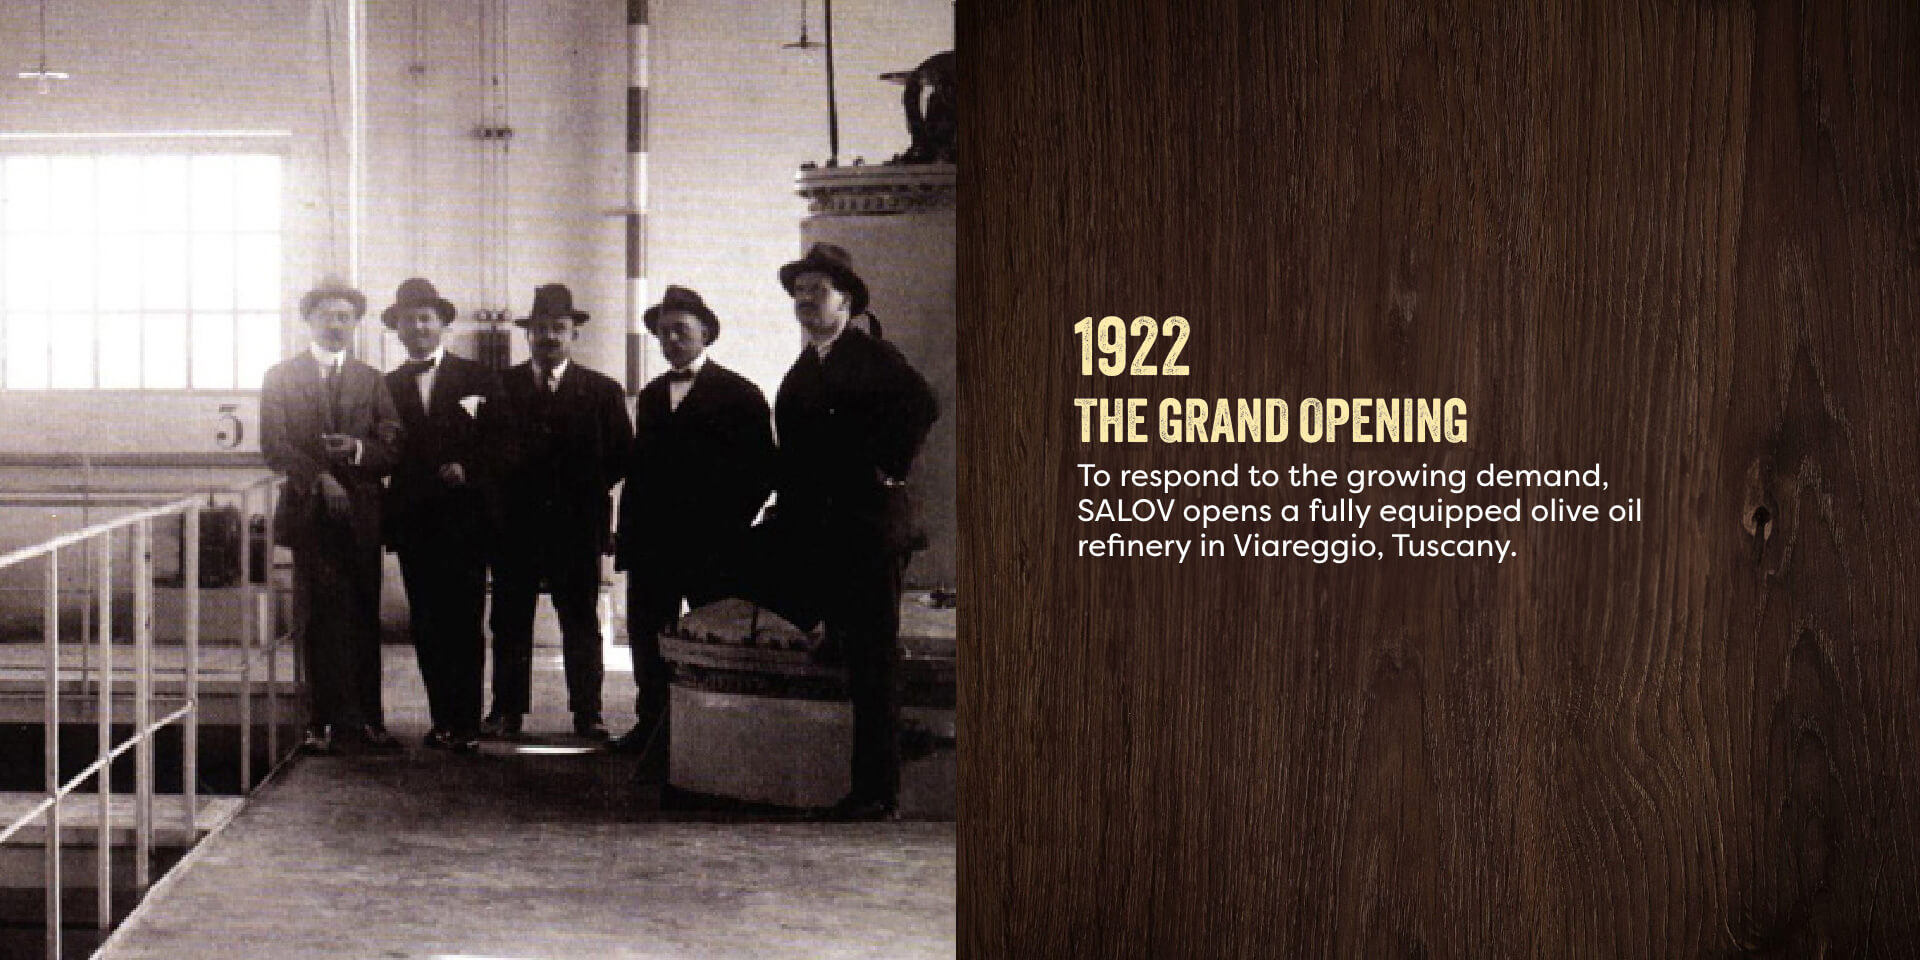 Our Heritage - 1922 - The Grand Opening